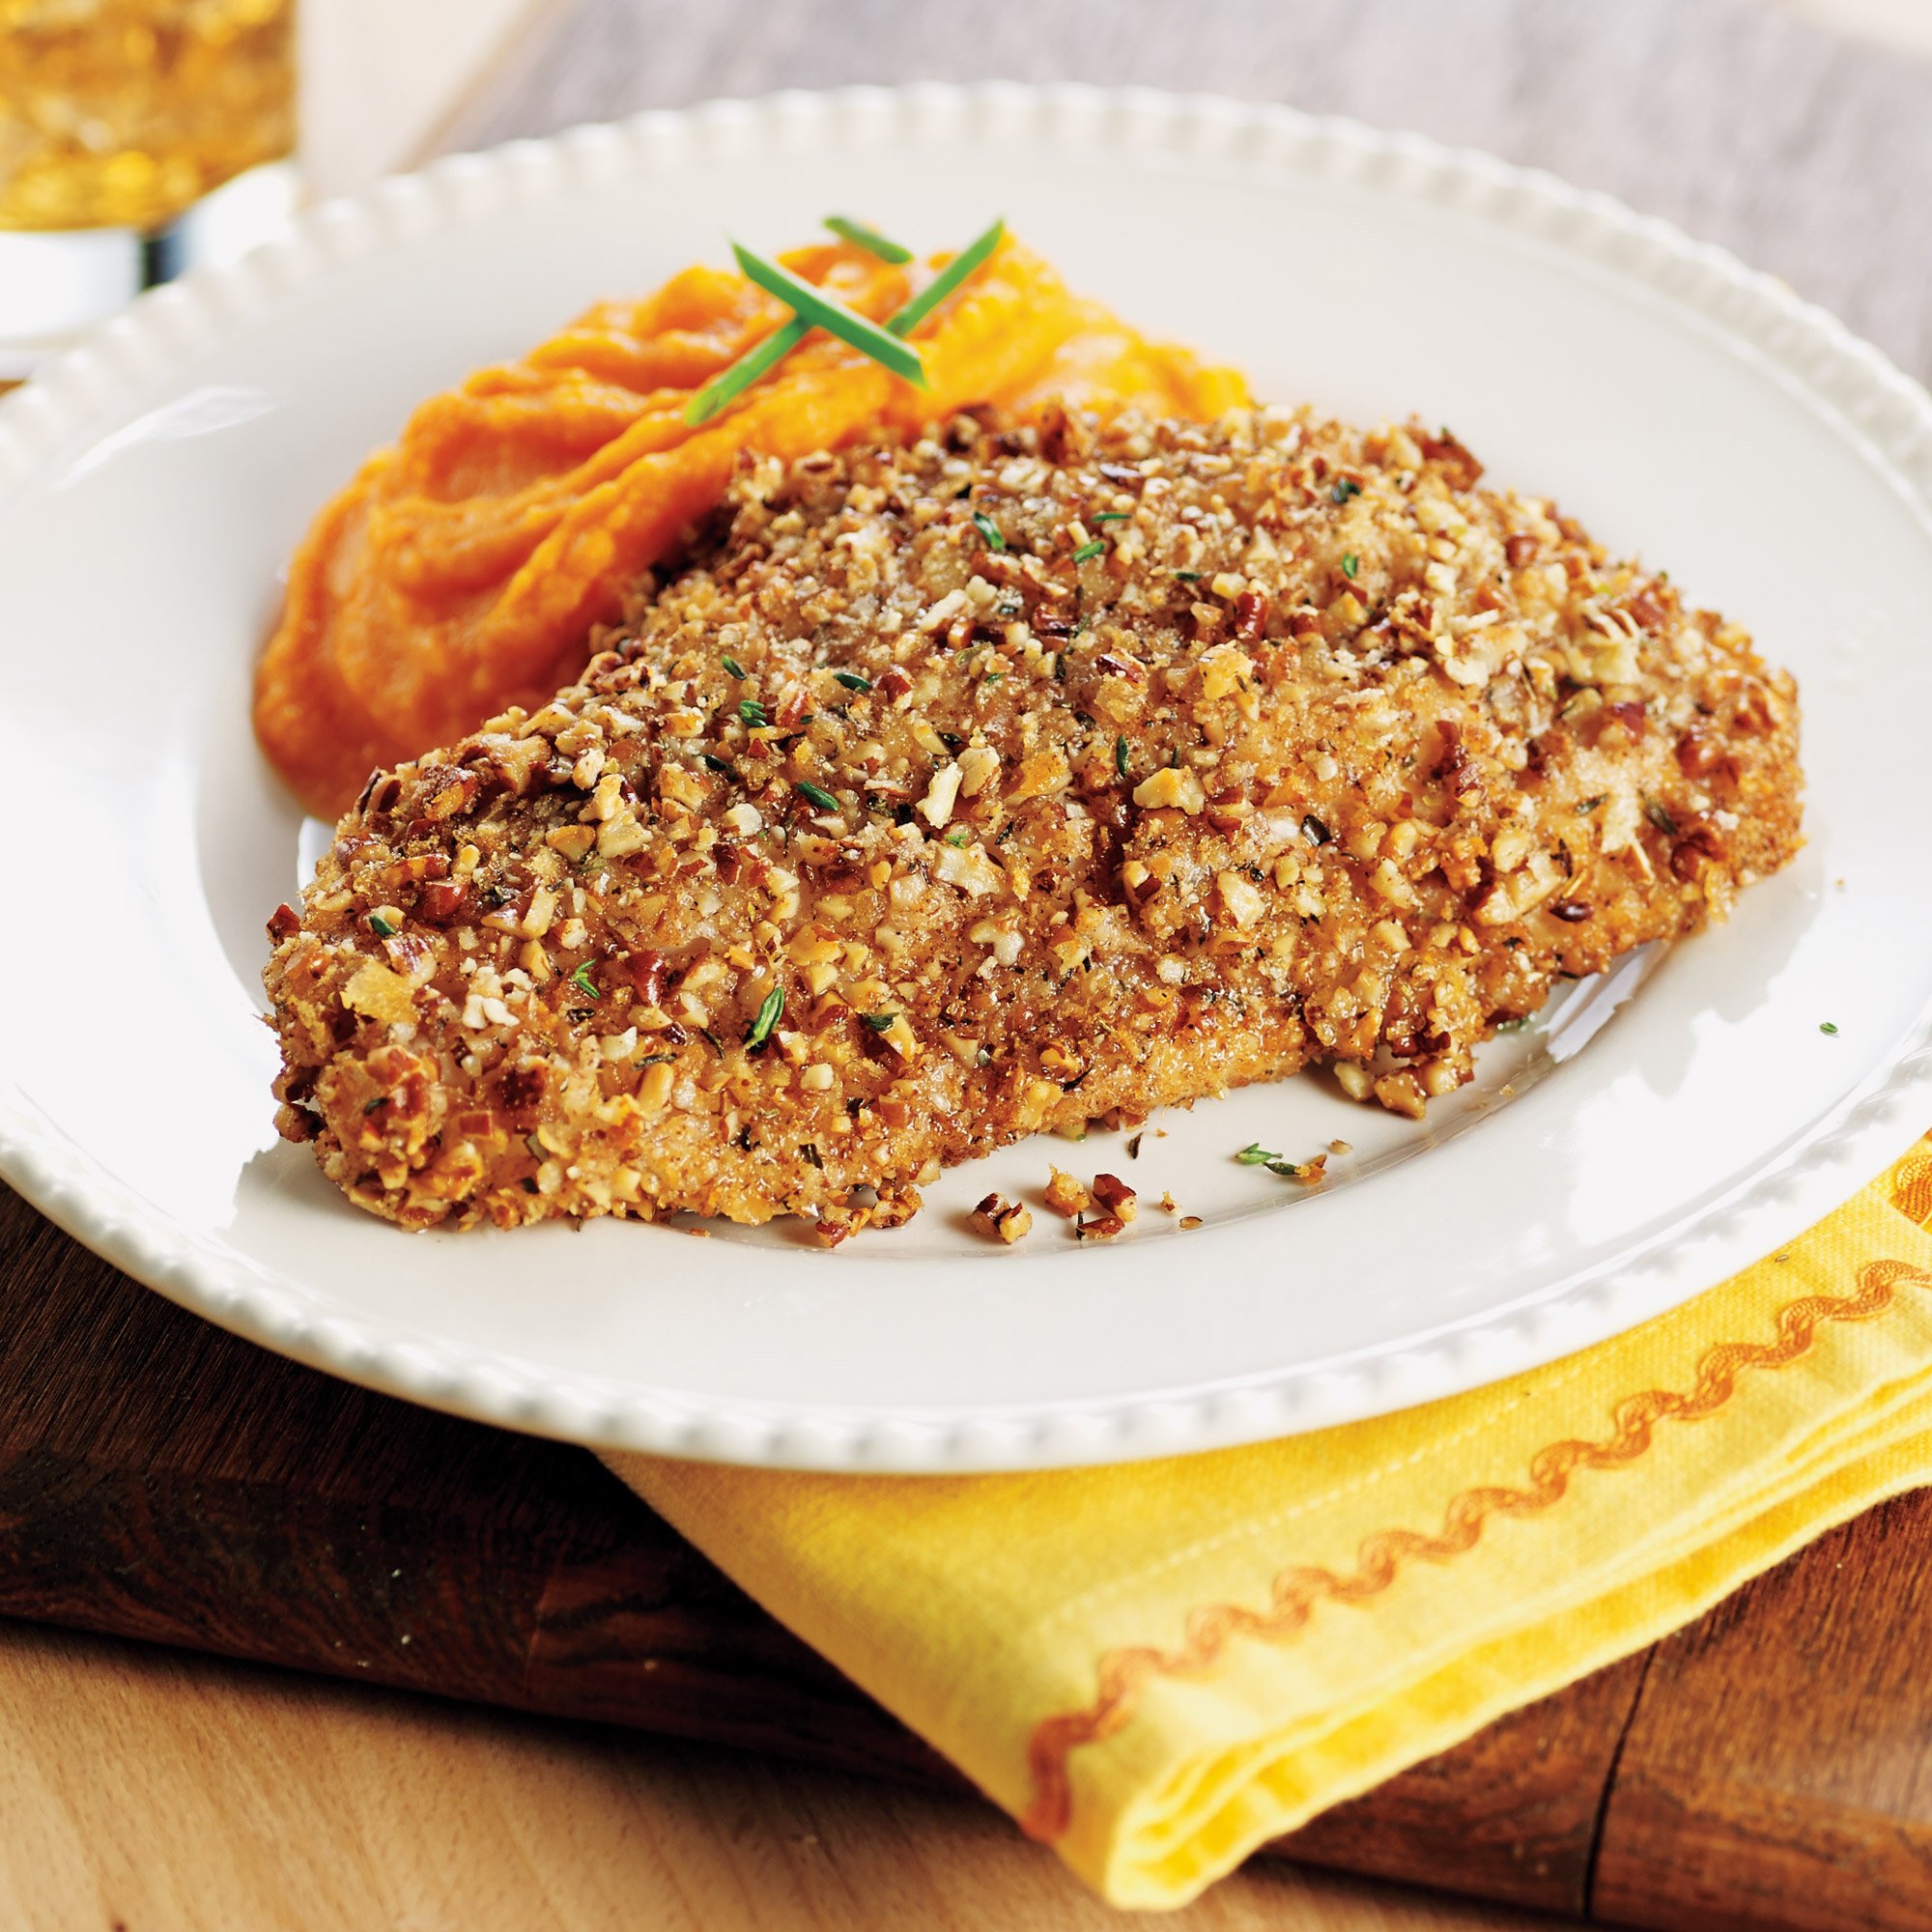 Hudson S Pecan Crusted Red Snapper Recipe From H E B,1 12 Scale Chart